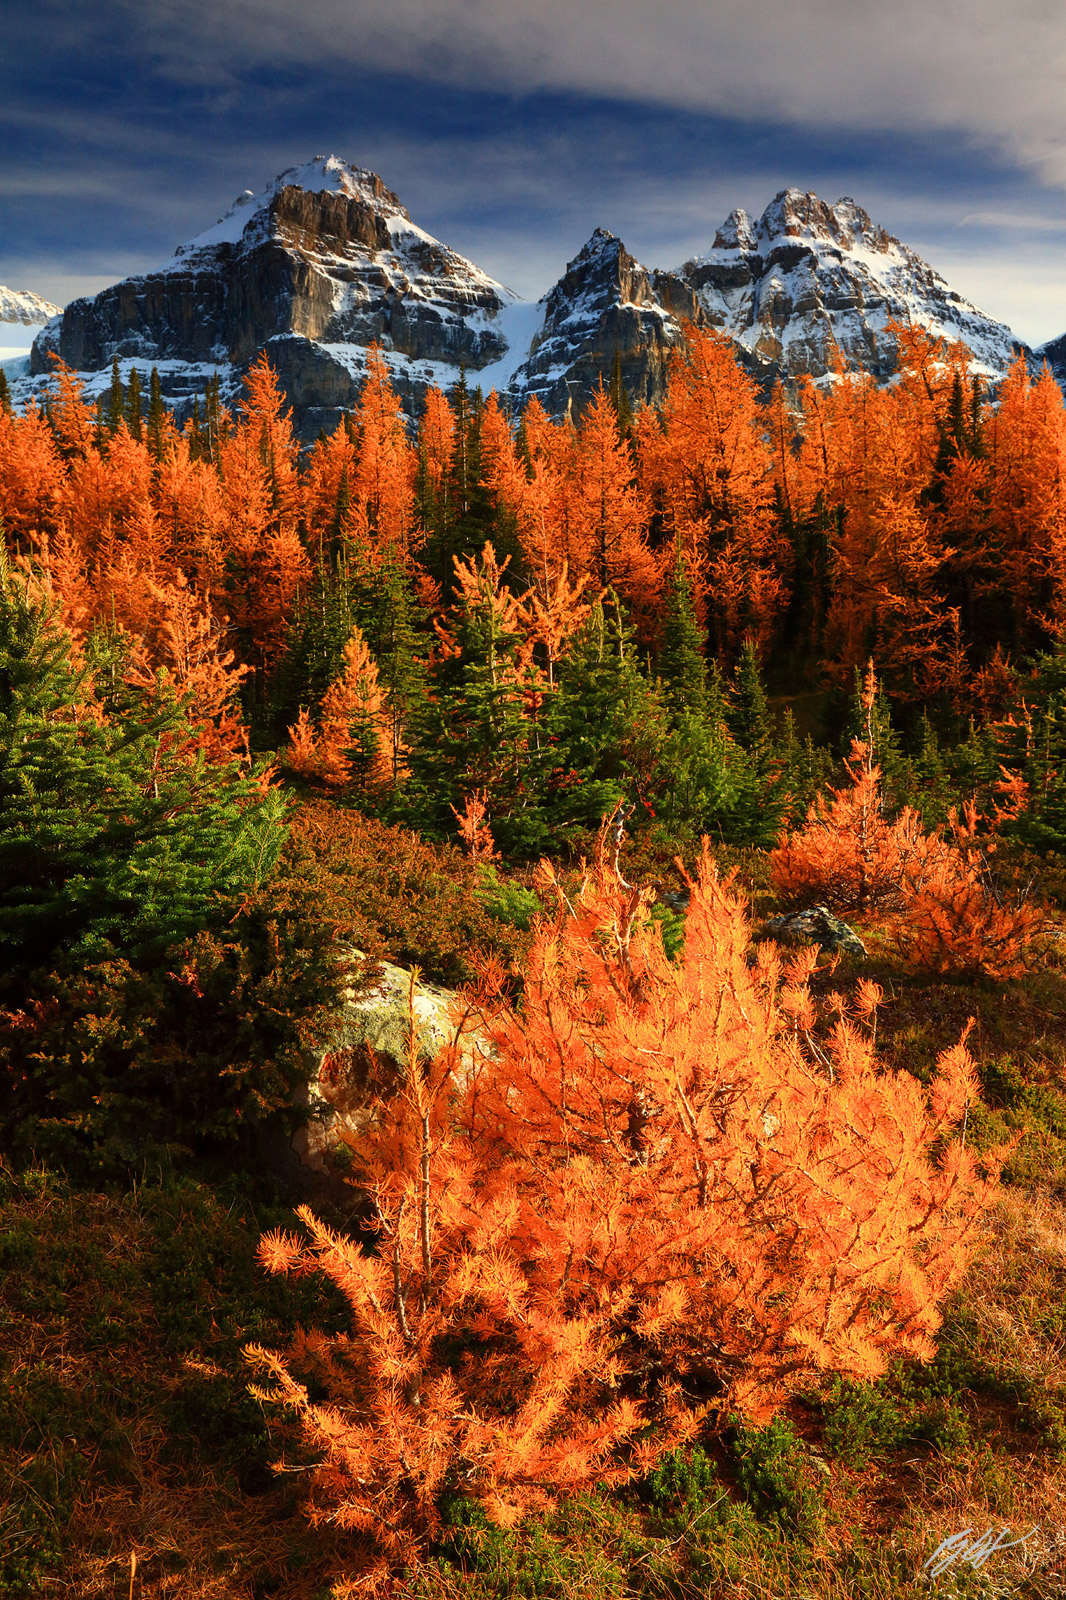 Golden Larch and the Ten Peaks in Banff National Park in Canada